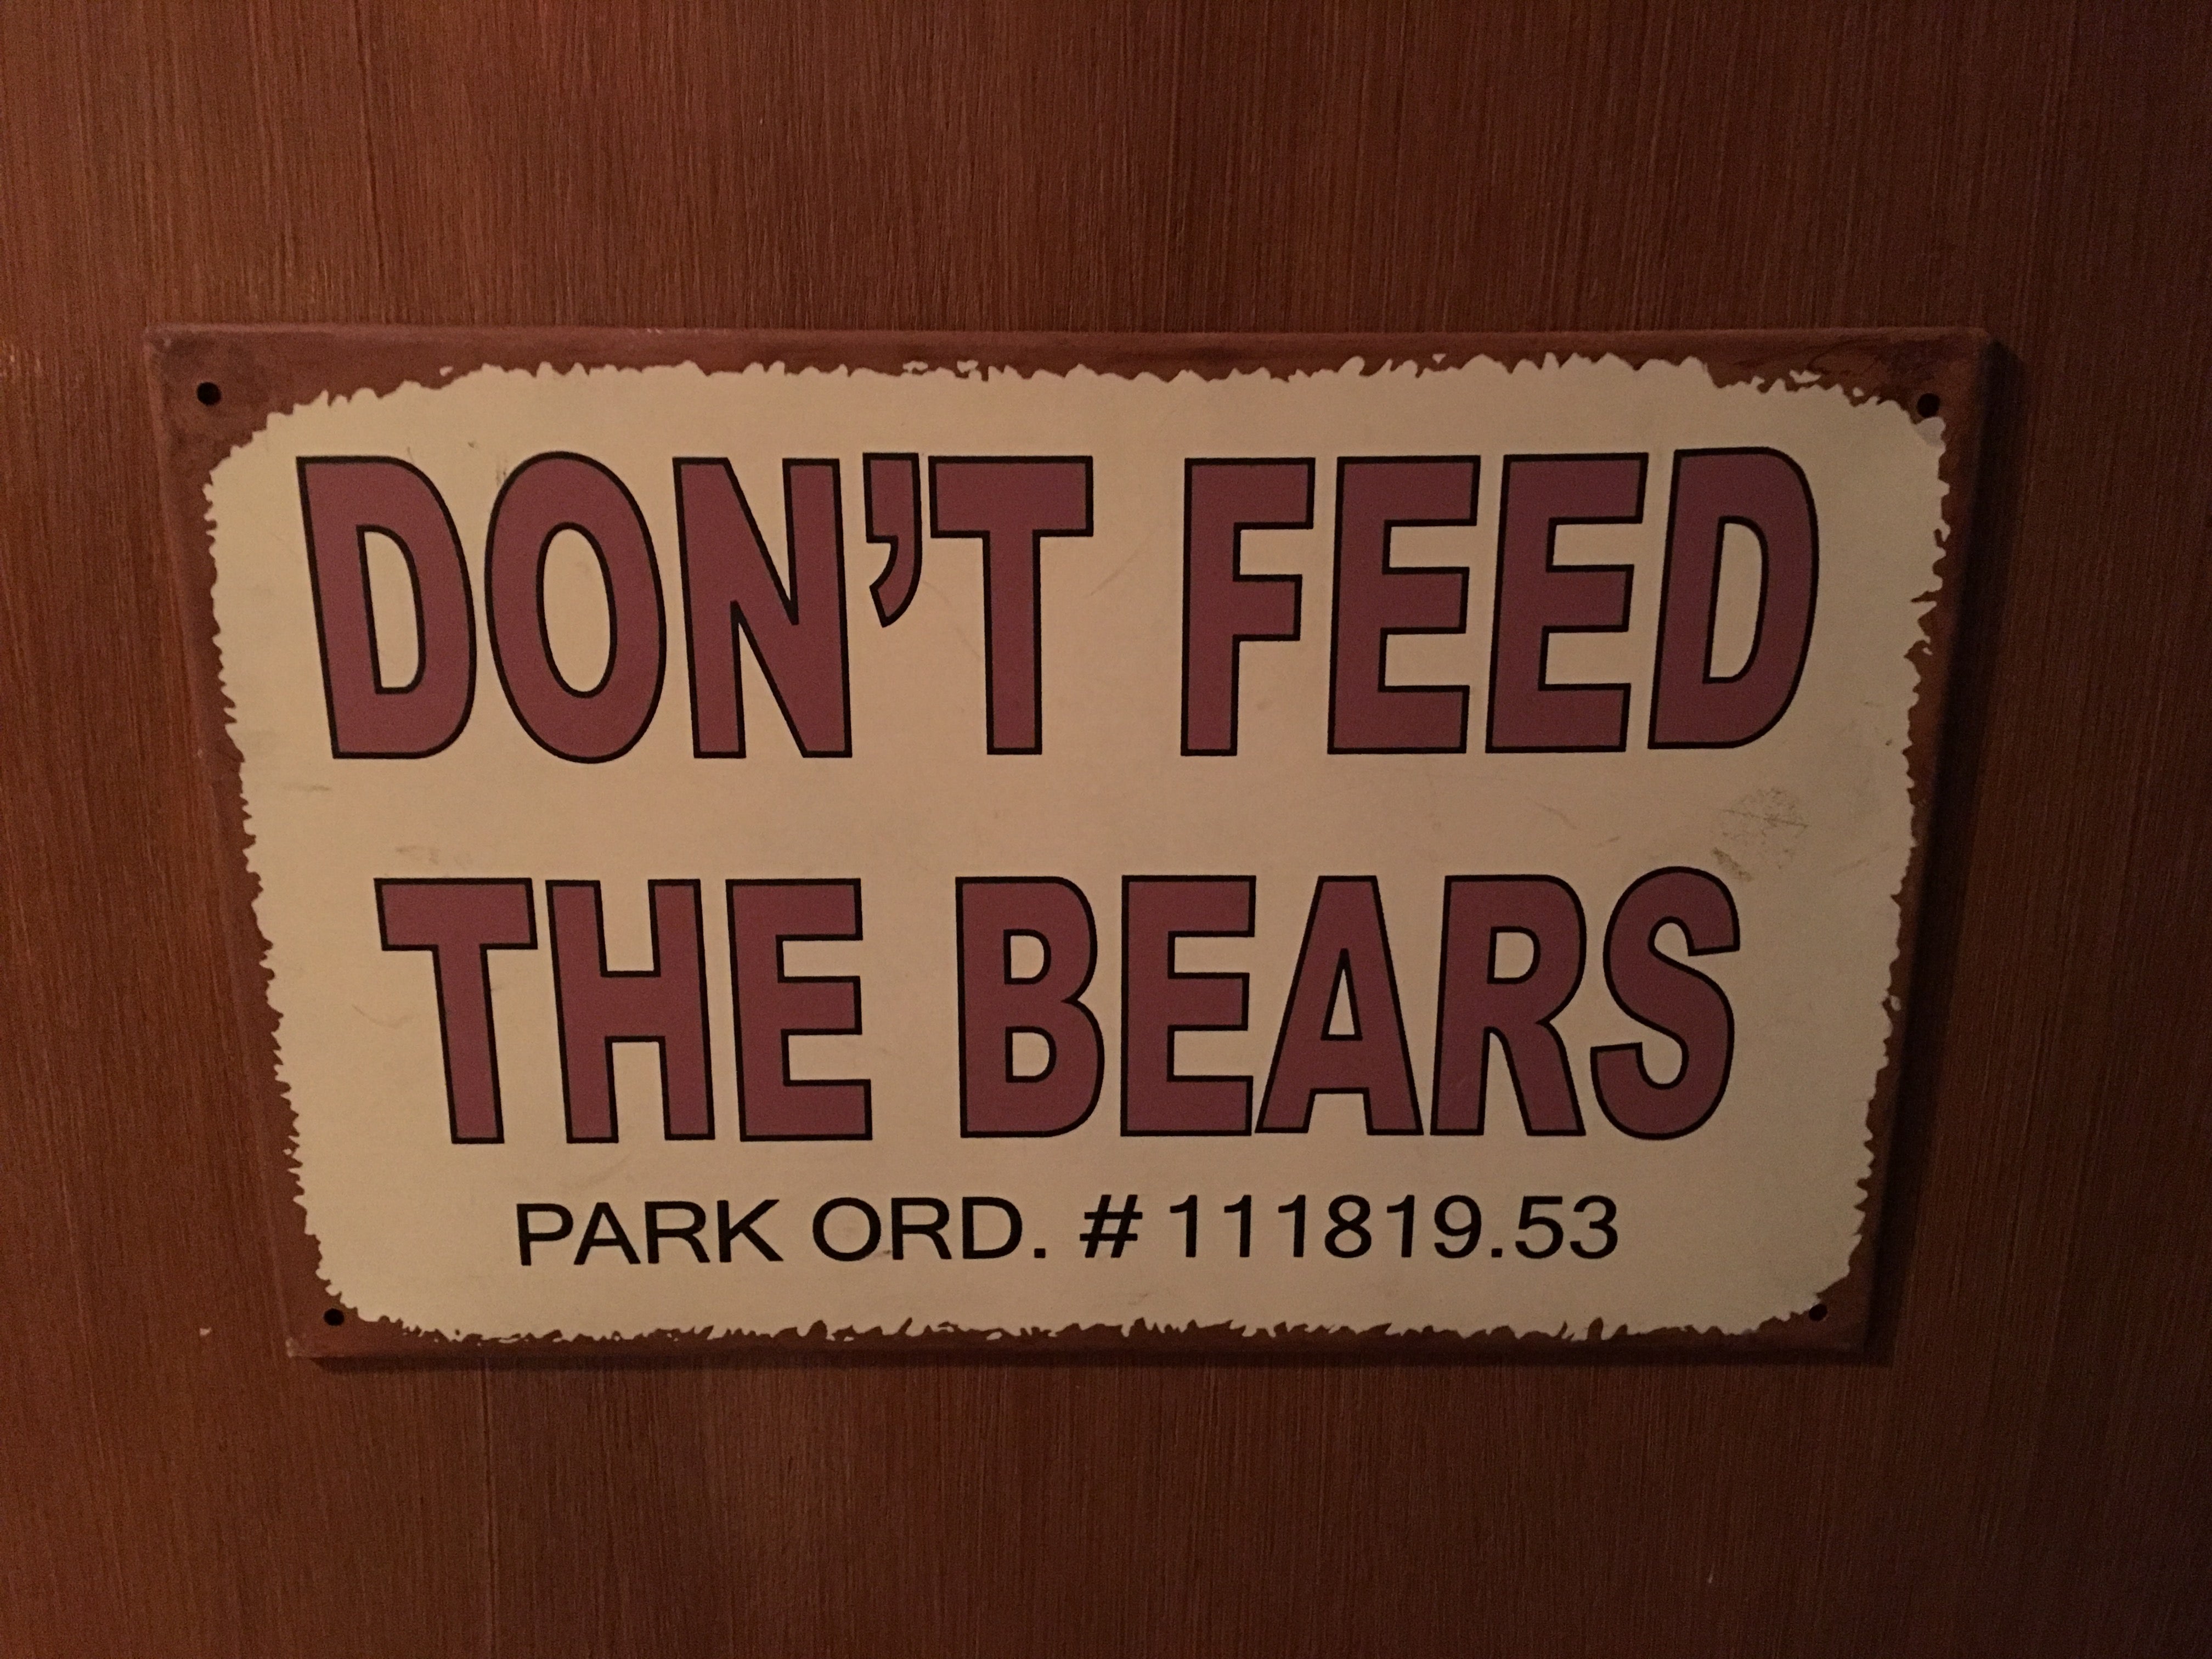 There is a bear proof food locker